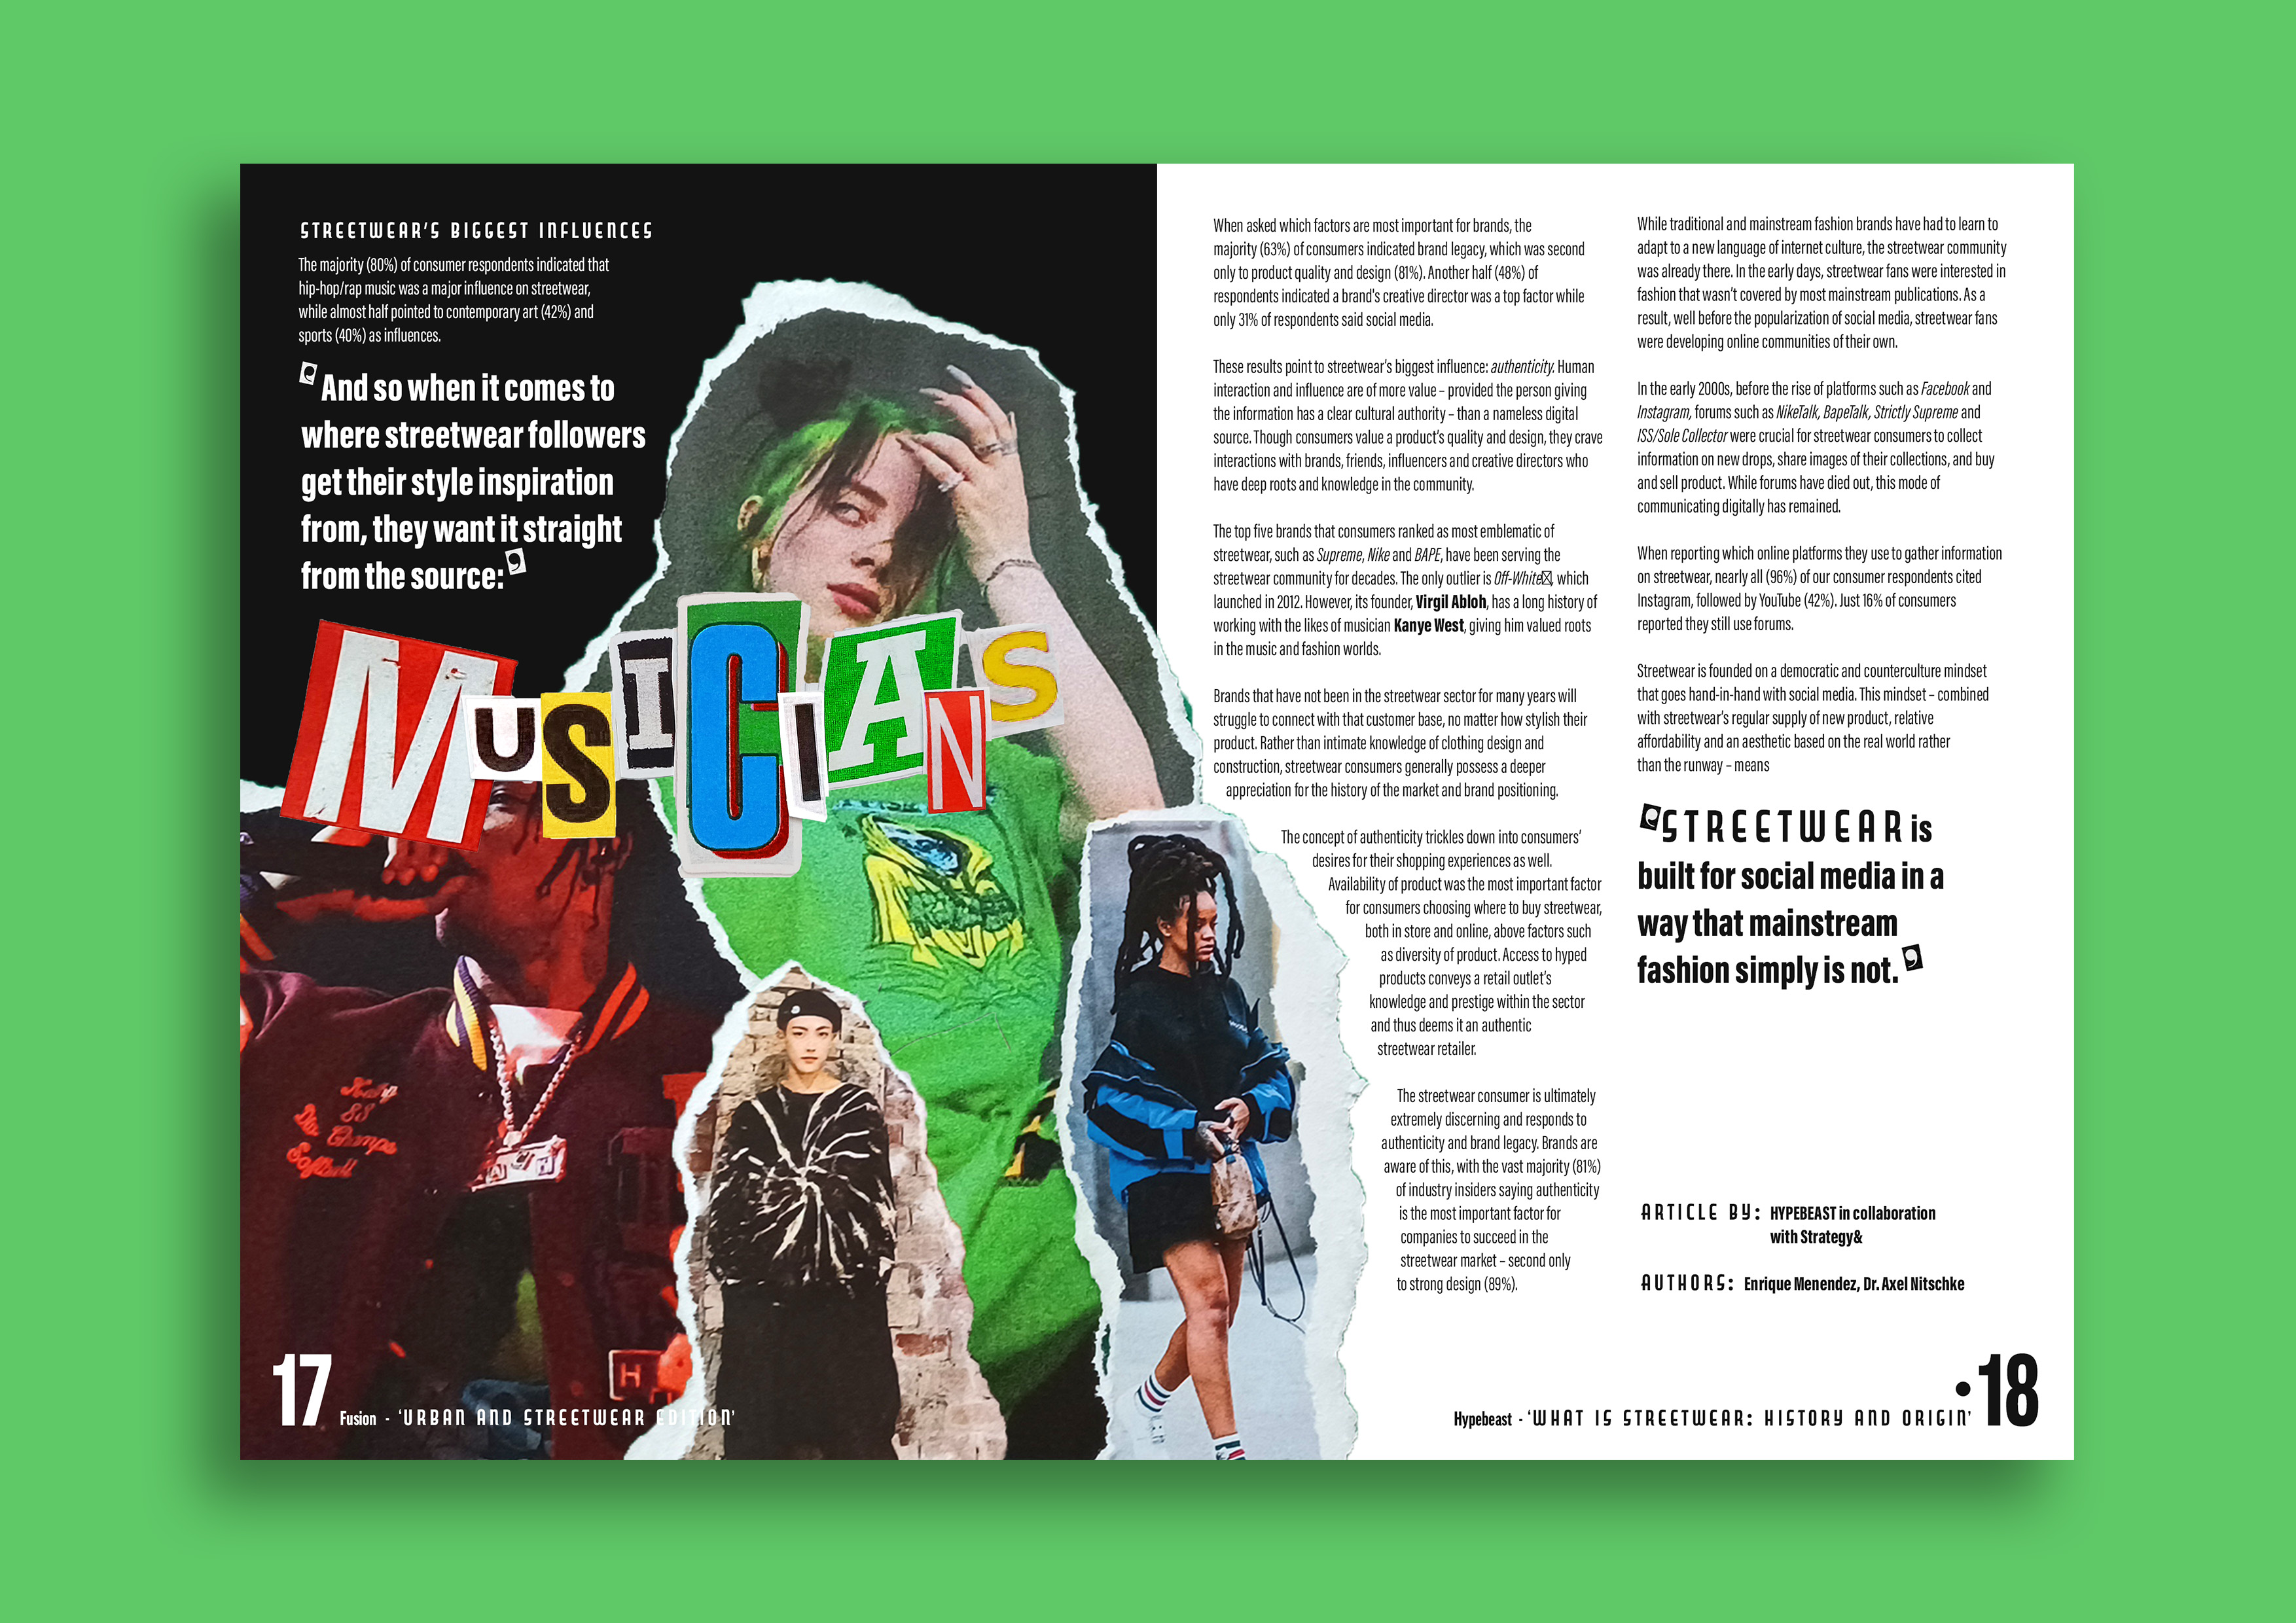 Magazine spread created using hand-made collages, exploring an article about musicians influence in the realm of streetwear.